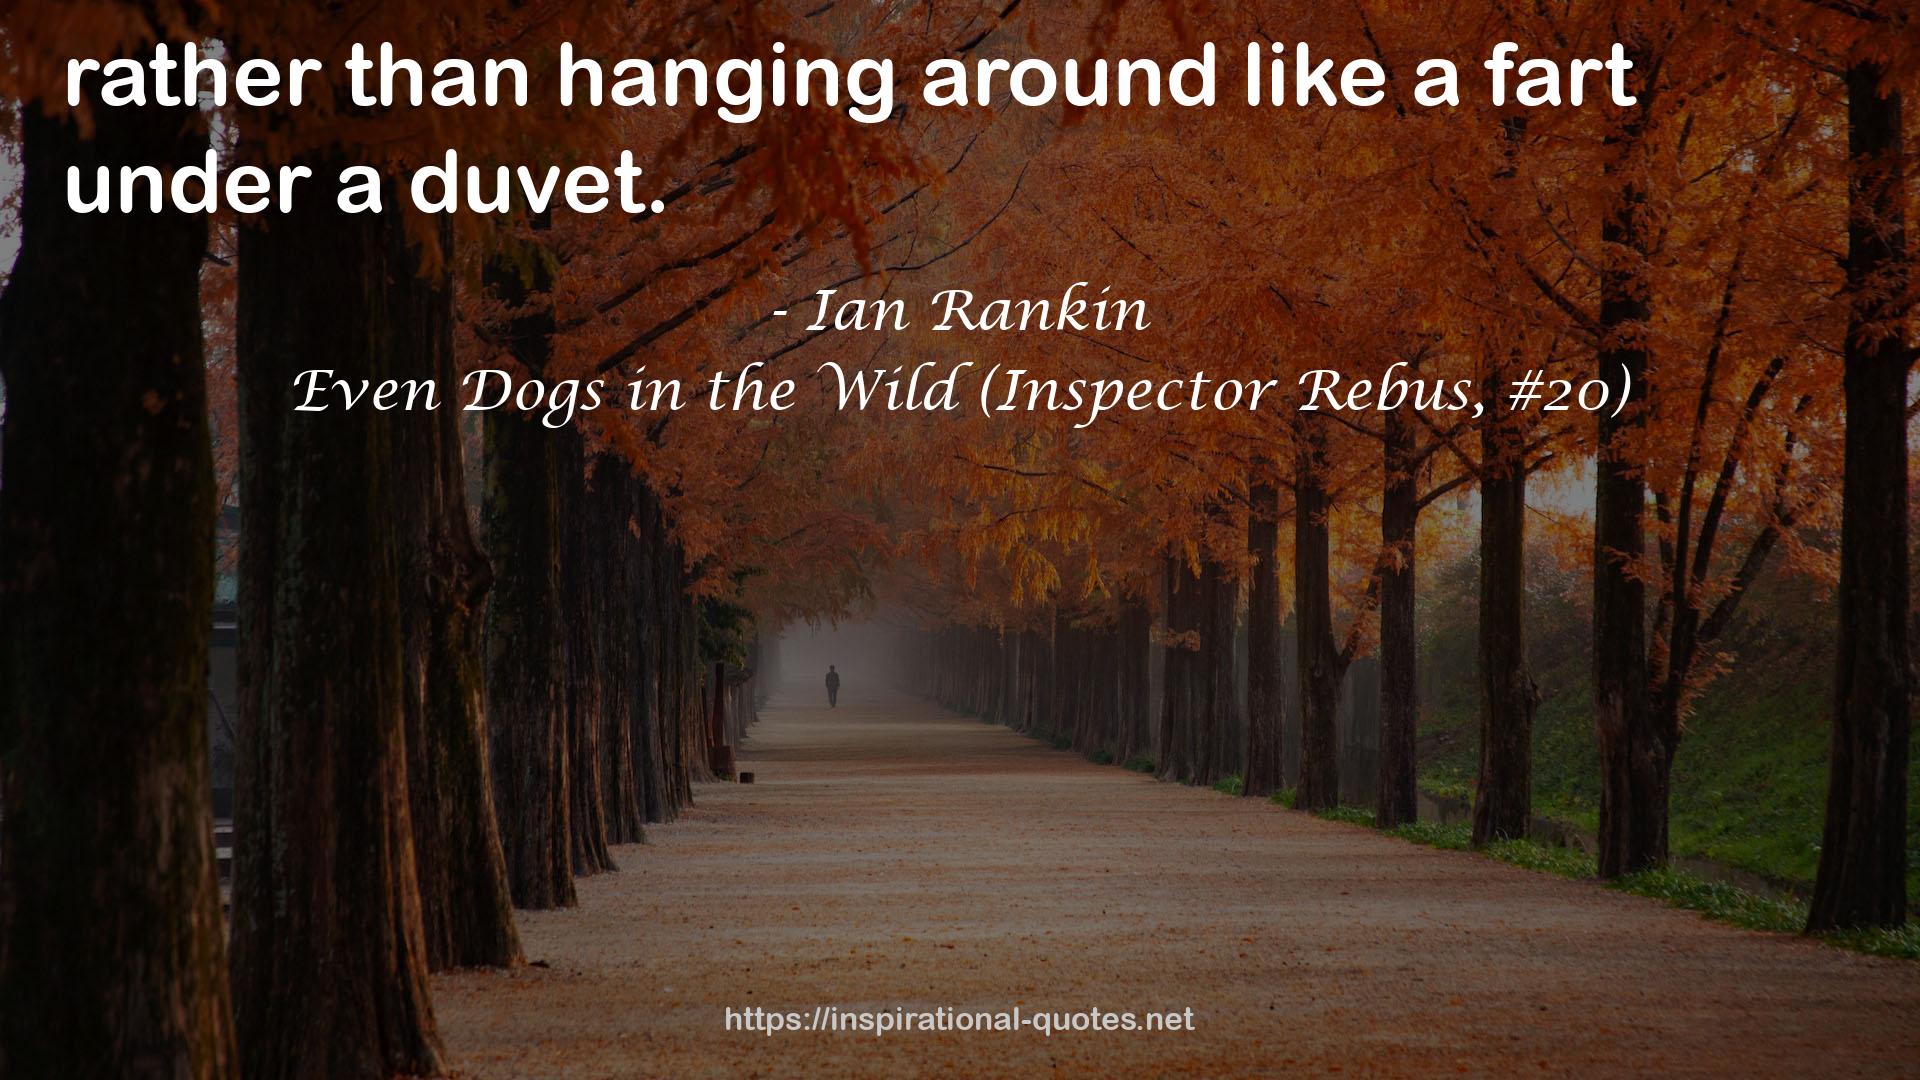 Even Dogs in the Wild (Inspector Rebus, #20) QUOTES